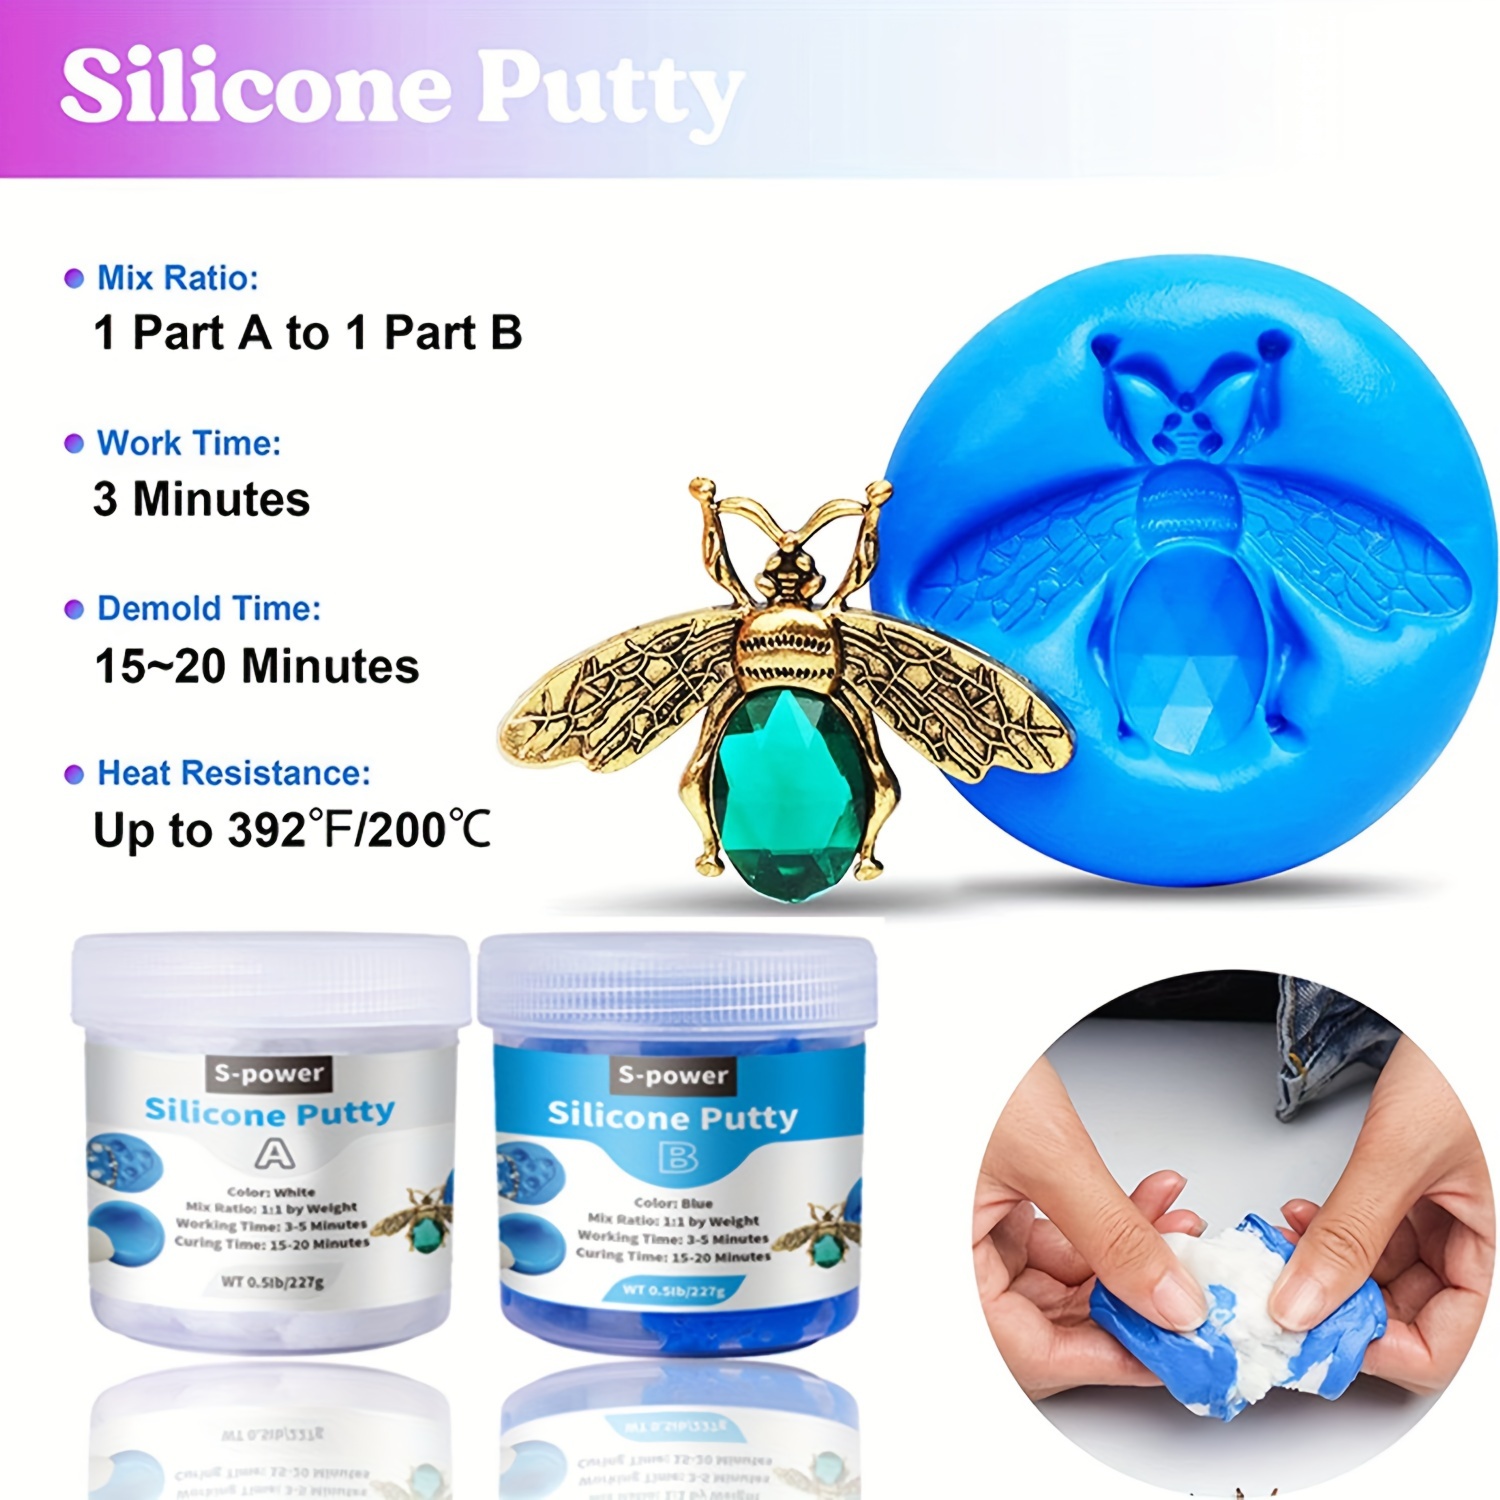 Mold Putty Silicone Mold Making Kit, Super Easy 1:1 Mix Mold Putty